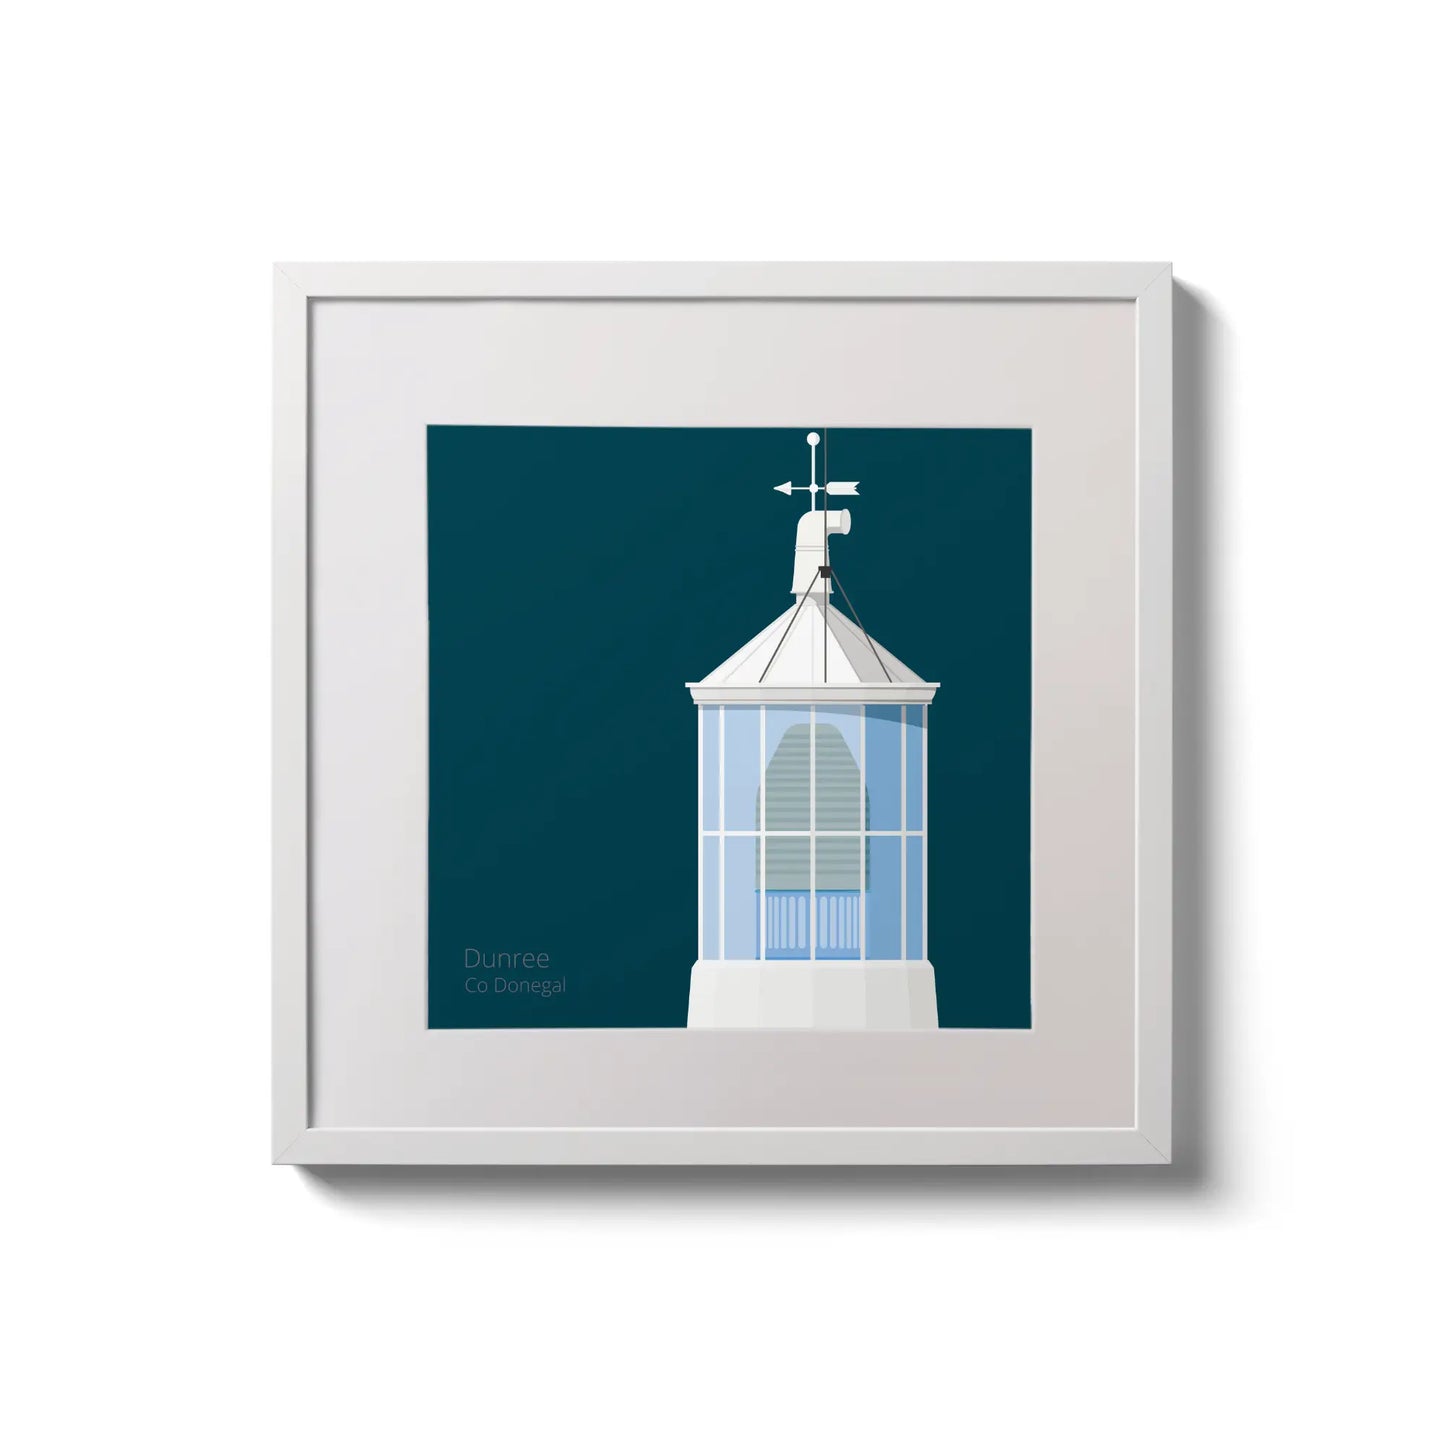 Framed wall art decoration Dunree lighthouse on a midnight blue background,  in a white square frame measuring 20x20cm.